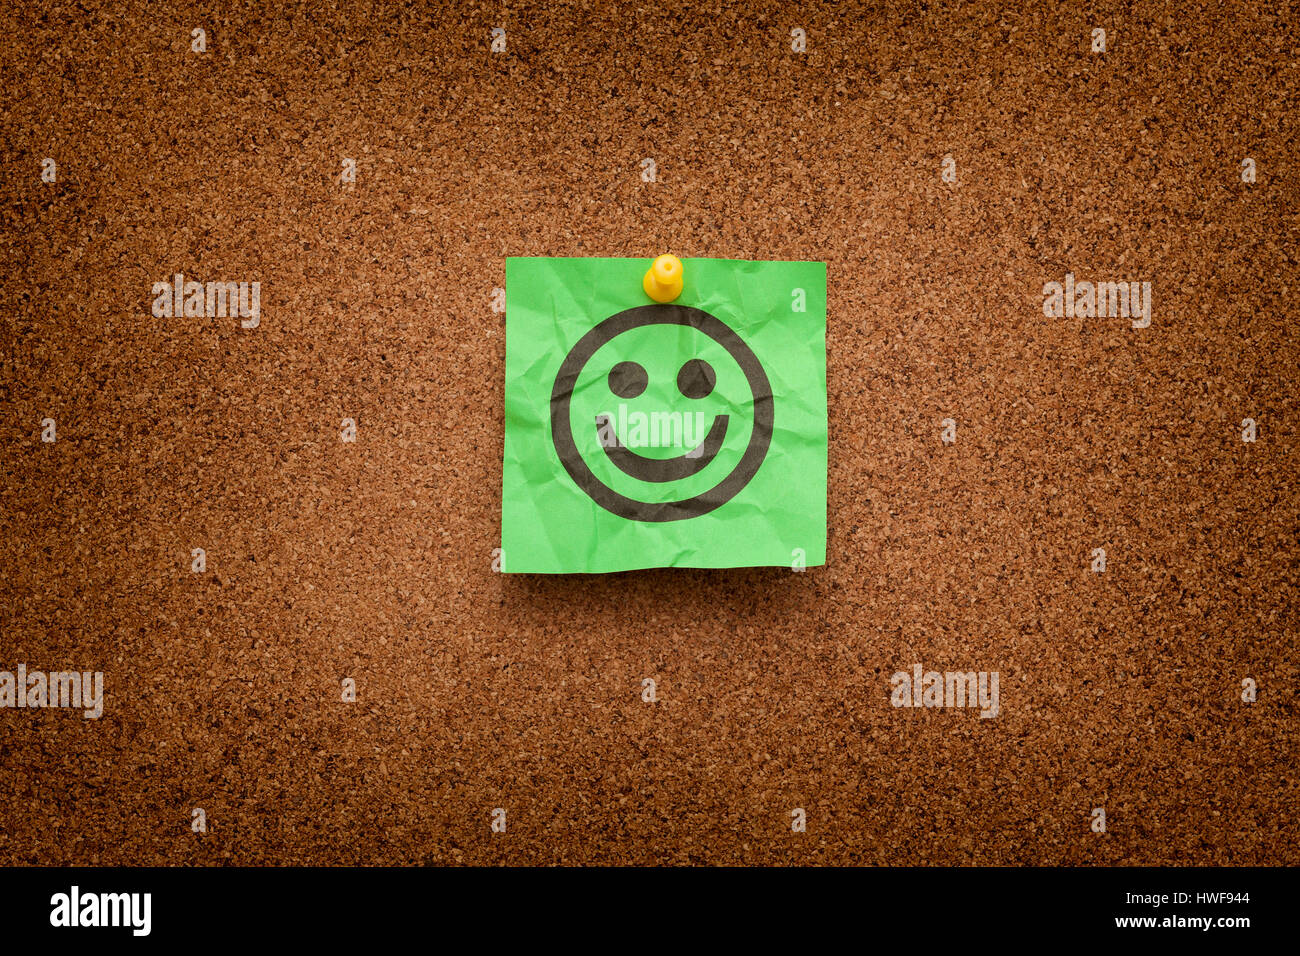 Crumpled green paper with smiling face on corkboard (bulletin board). Stock Photo